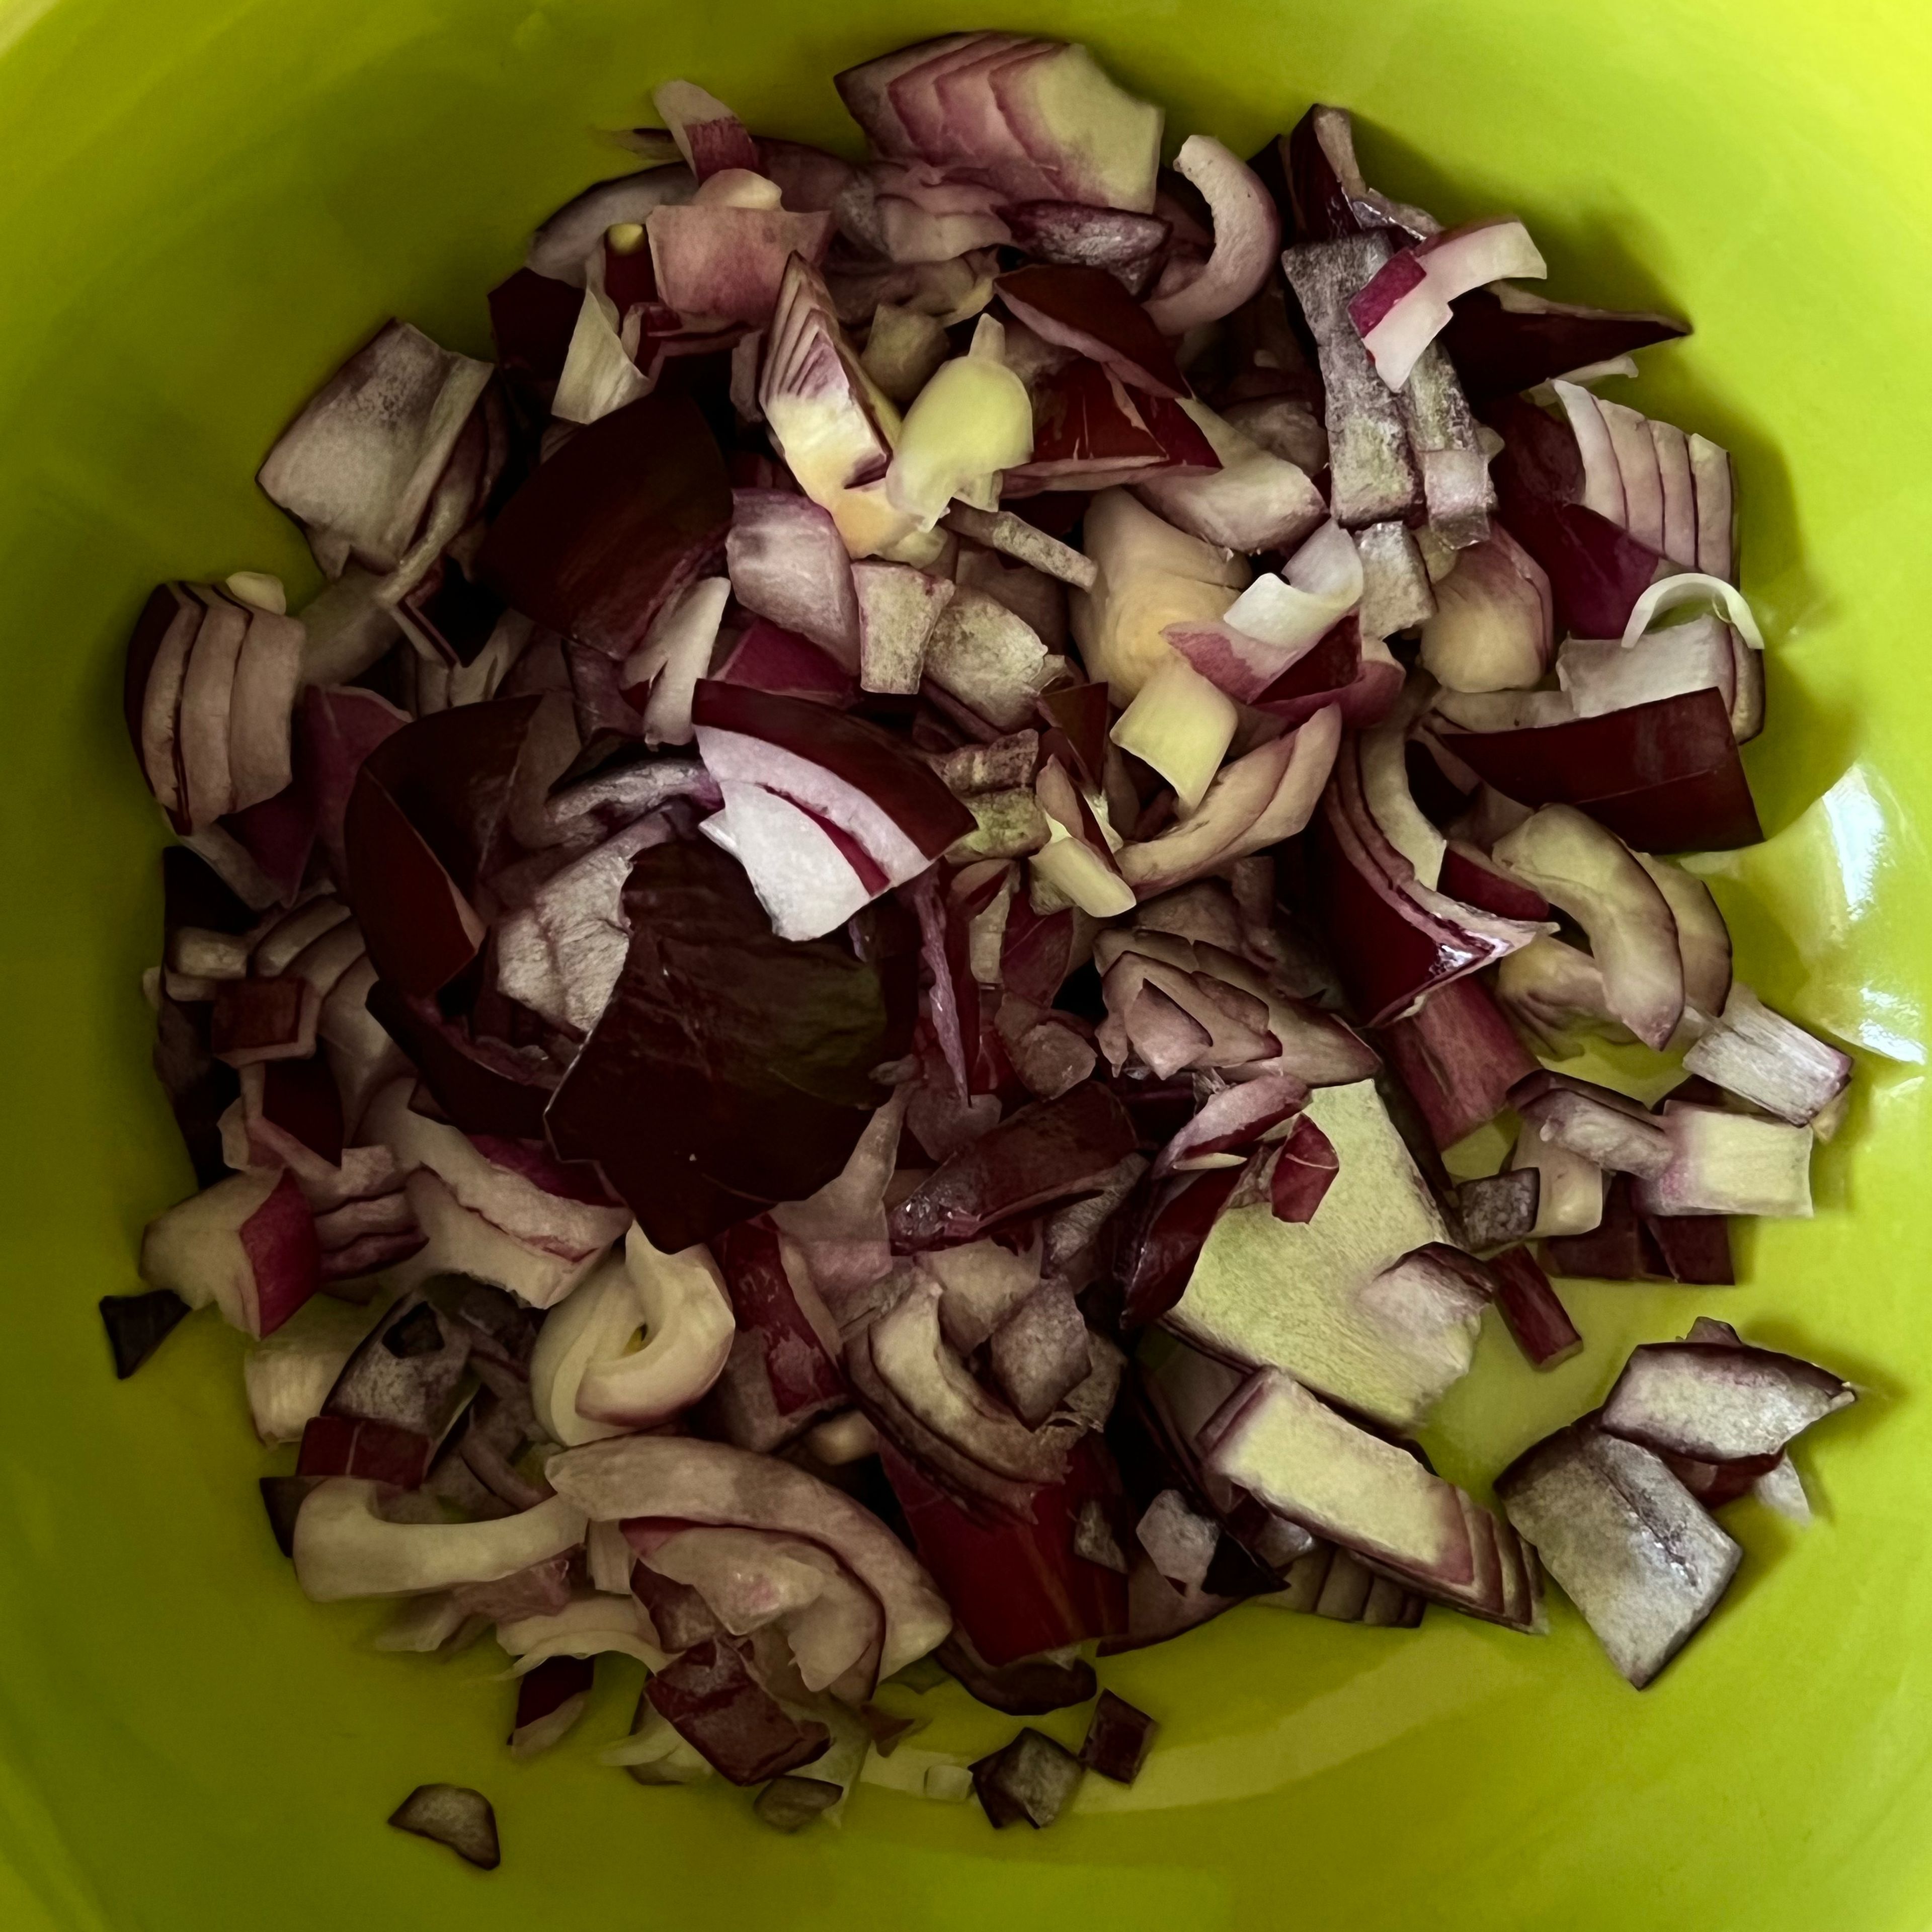 Cut your red onion into small pieces and put them in a bowl.